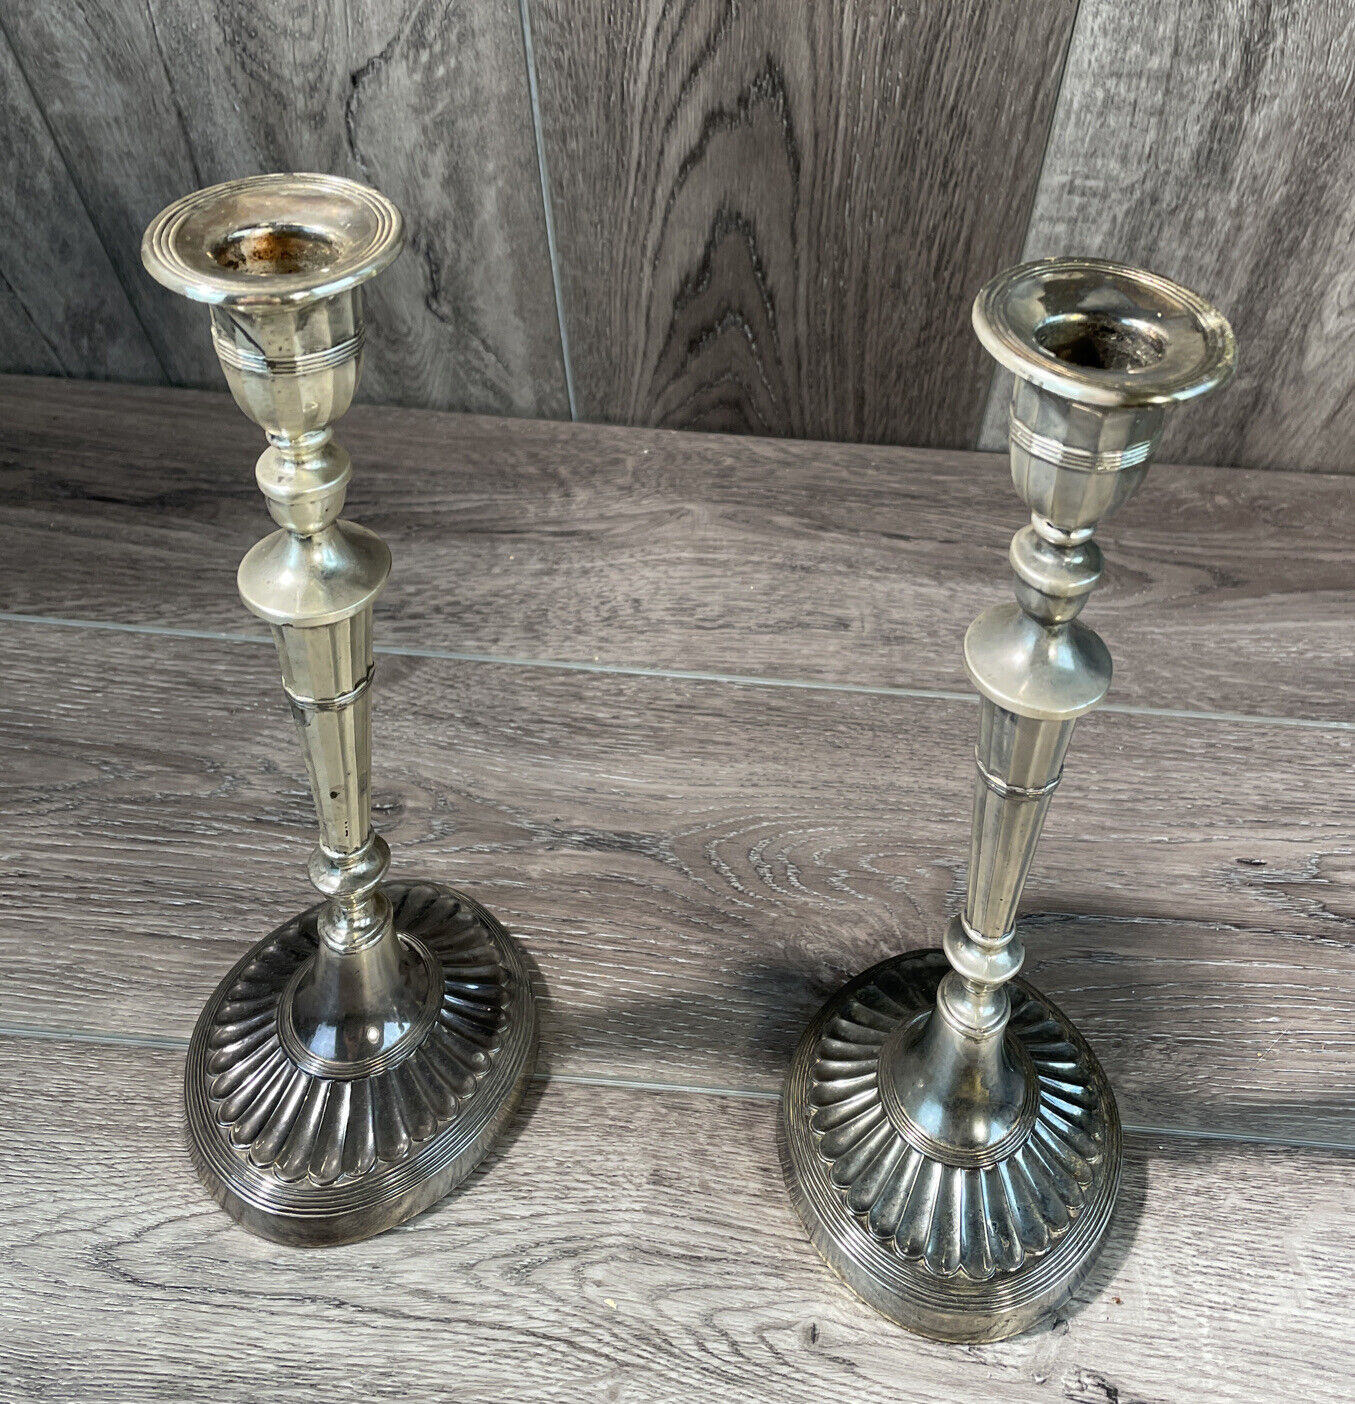 Vintage Gorham Silver Plate Classic Candlesticks 9” Pair of Candle Holders